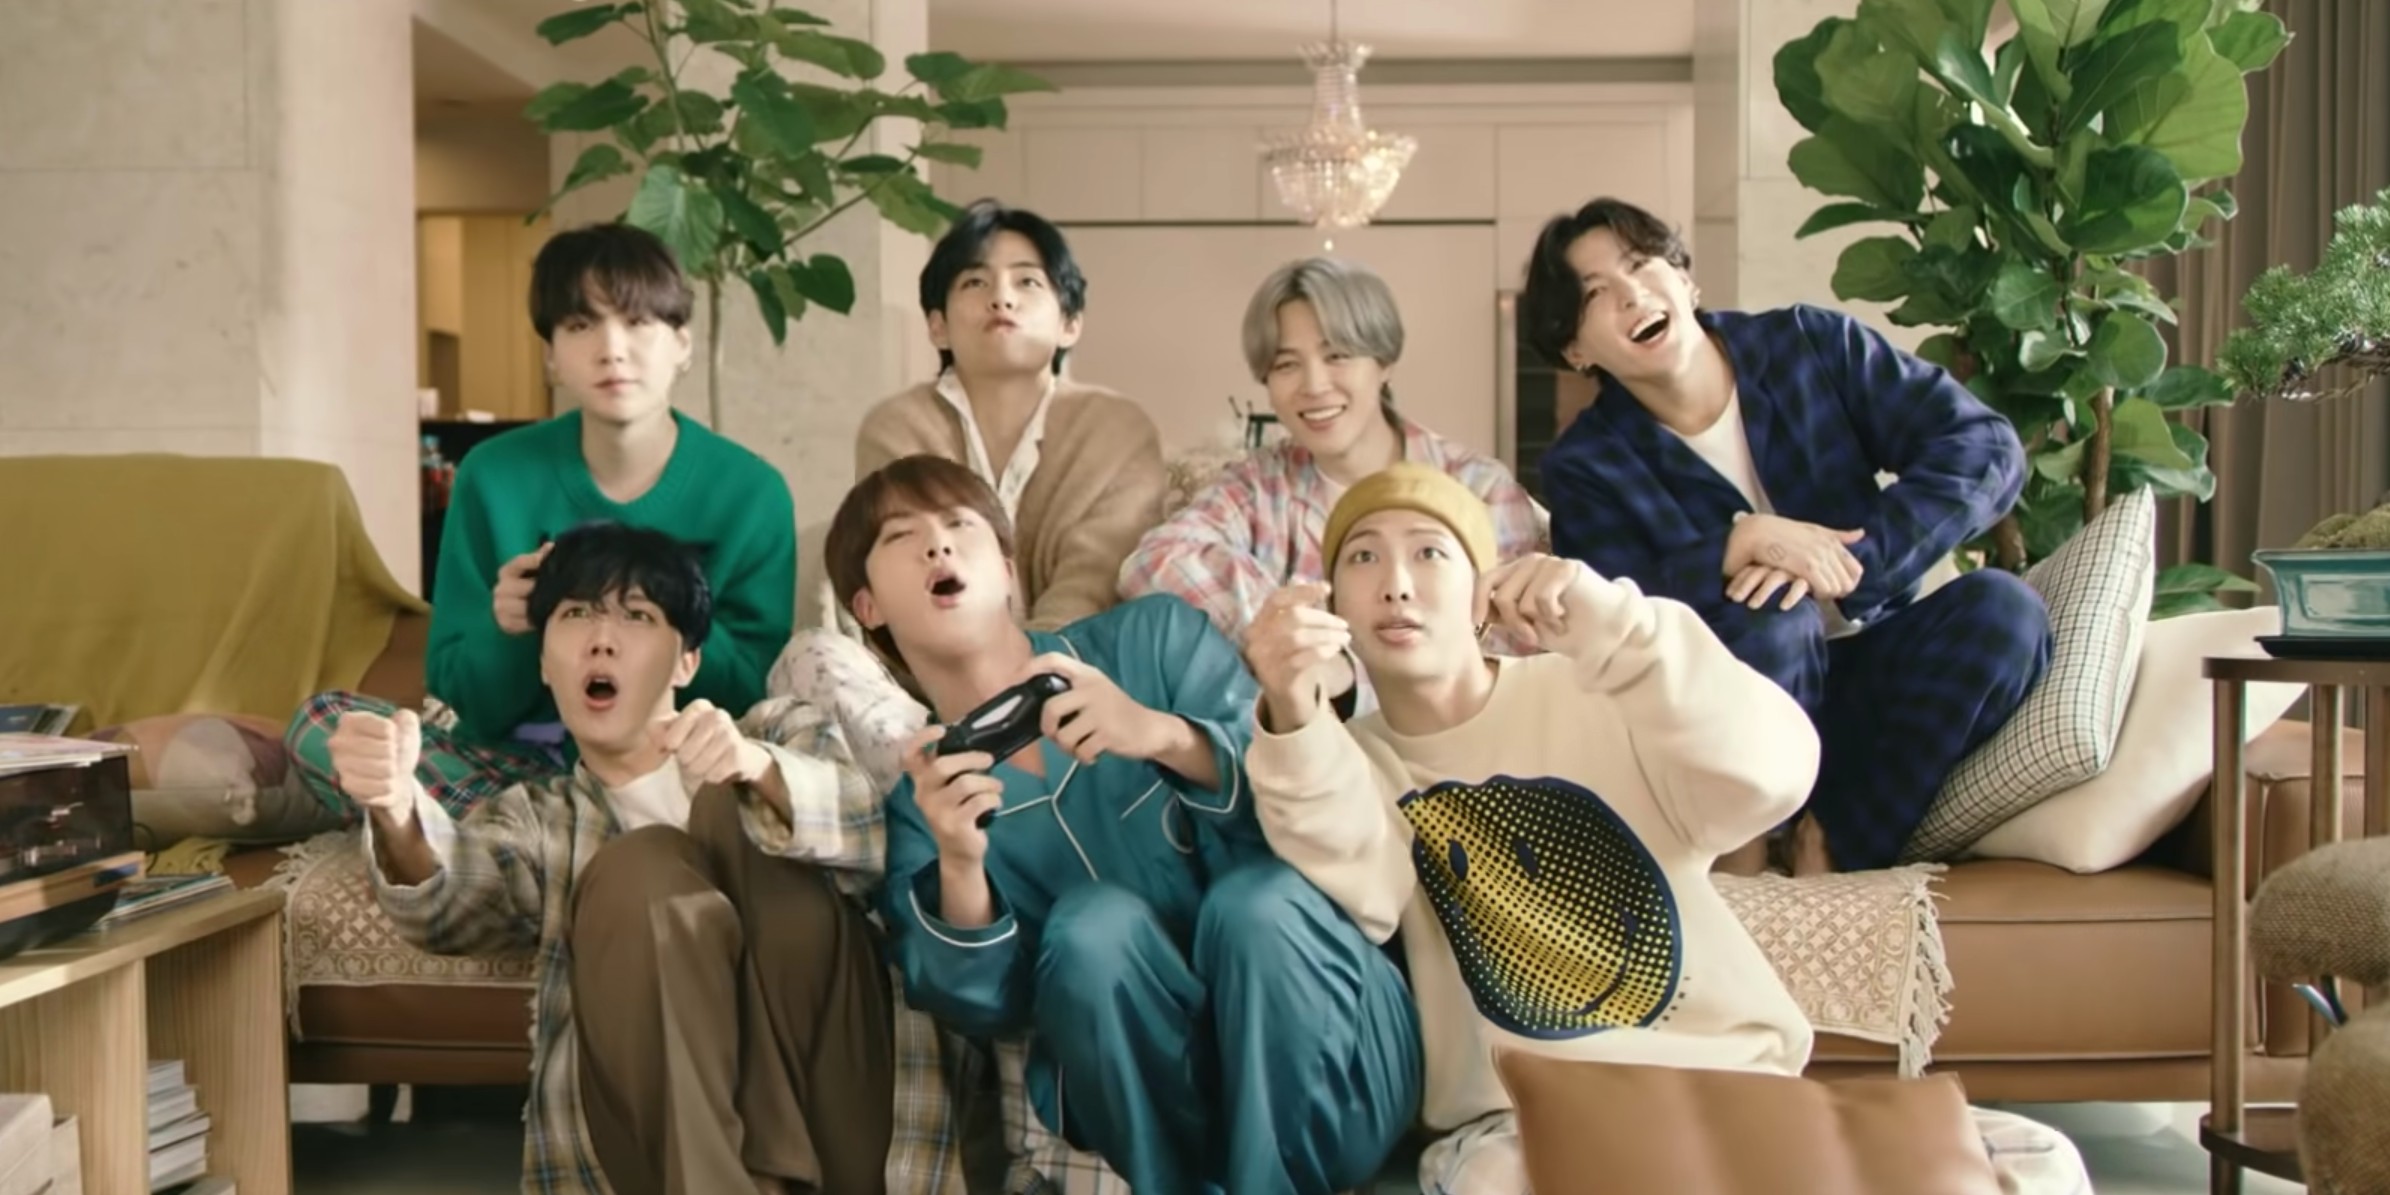 BTS announce TikTok challenge for ARMY version of the 'Life Goes On' music video